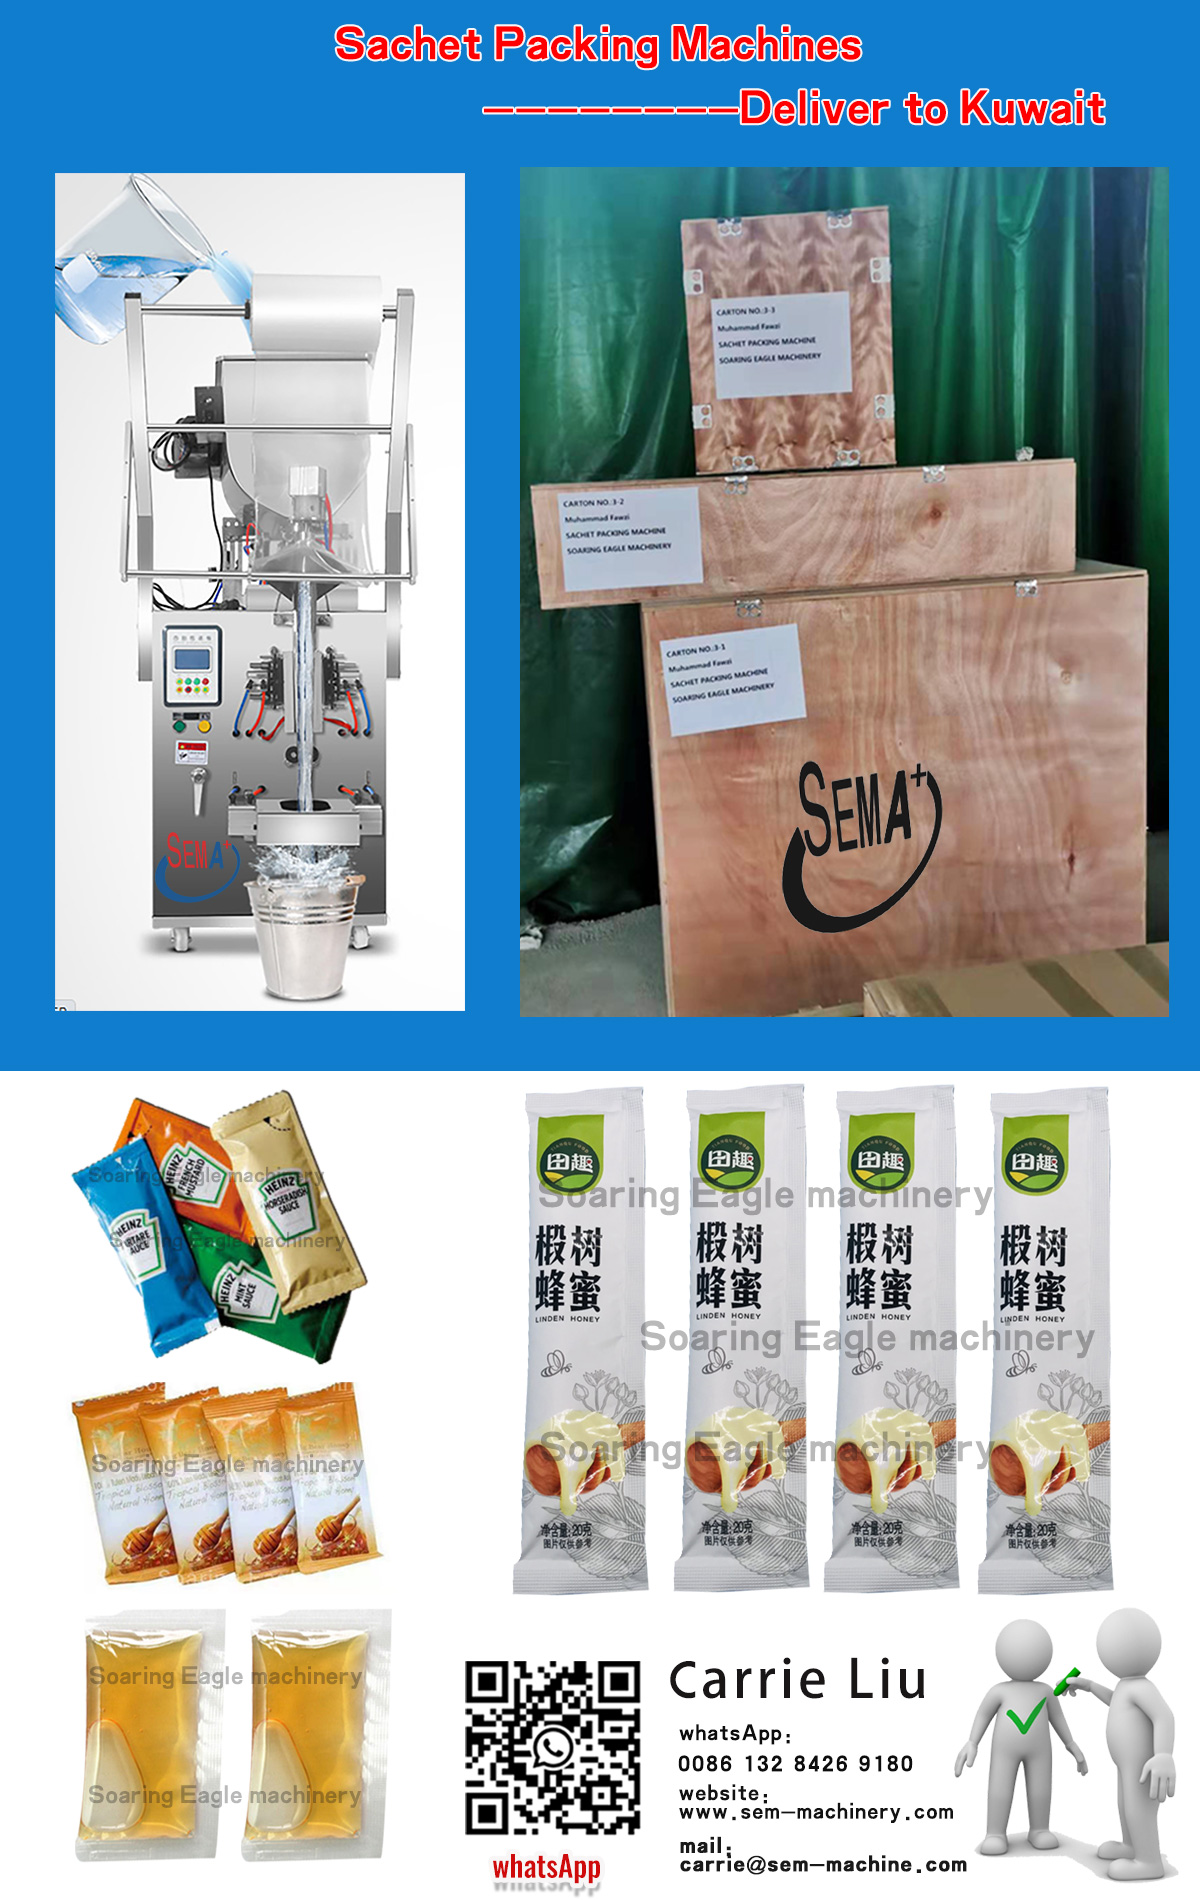 Automatic Sachet Packaging Machine ——deliver to Kuwait